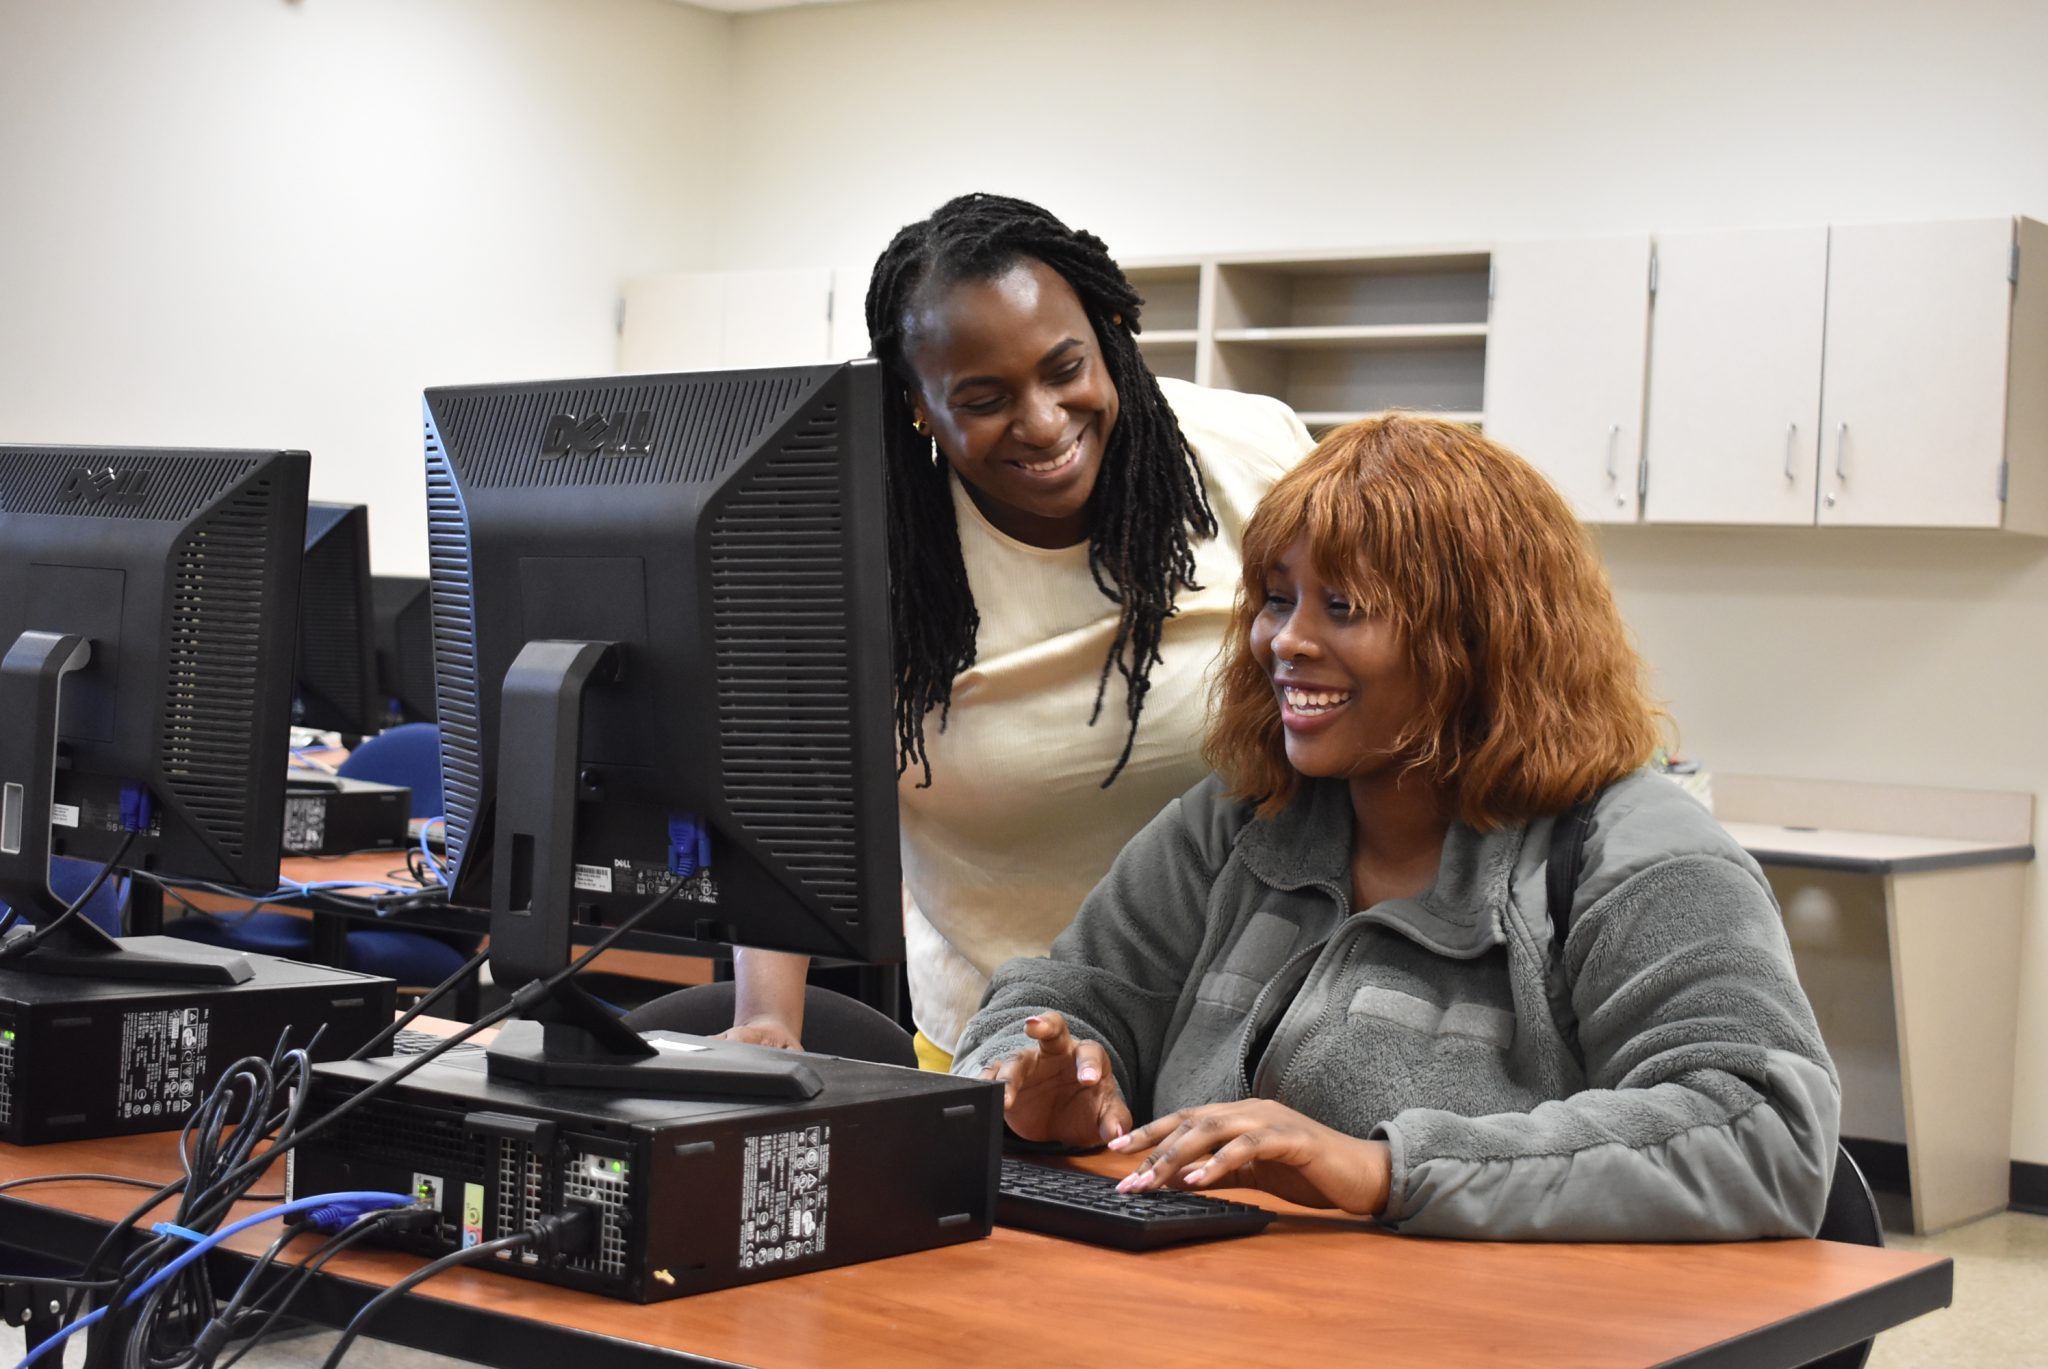 A valuable lesson: Coach Karen Clarke helps student Zaynah Burch at the computer. They are both involved in “SNHU powered by JEVS,” a program that allows adults to gather career-furthering skills on their own schedule. LOGAN KRUM / TIMES